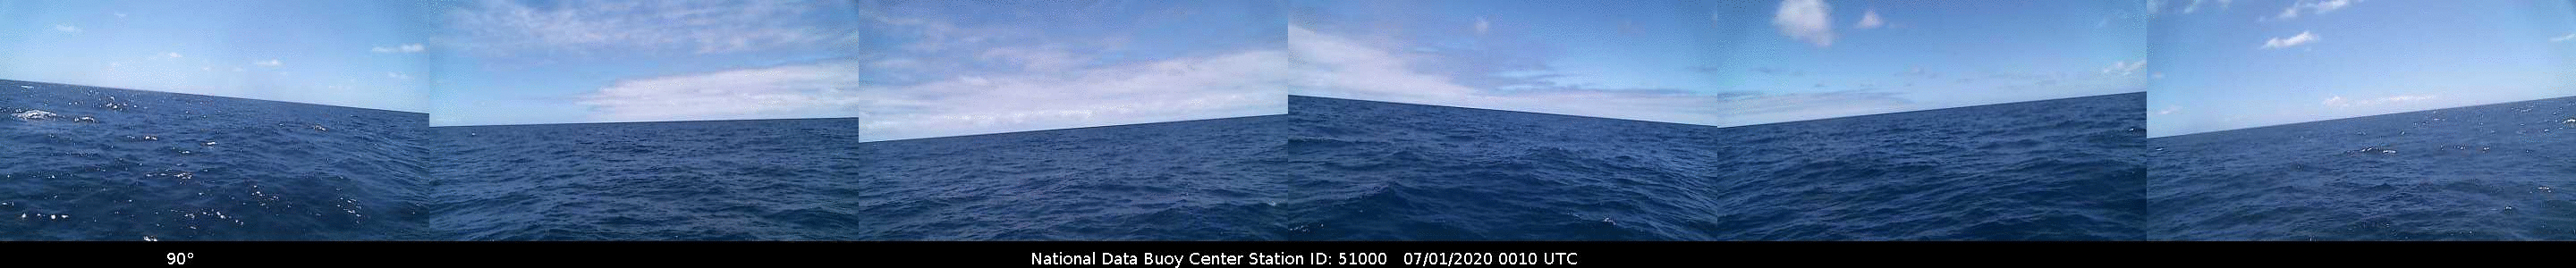 Sequence of 3 hourly (at 0010, 0110 and 0210 UTC) panoramic camera views from Buoy 51000 [click to enlarge]